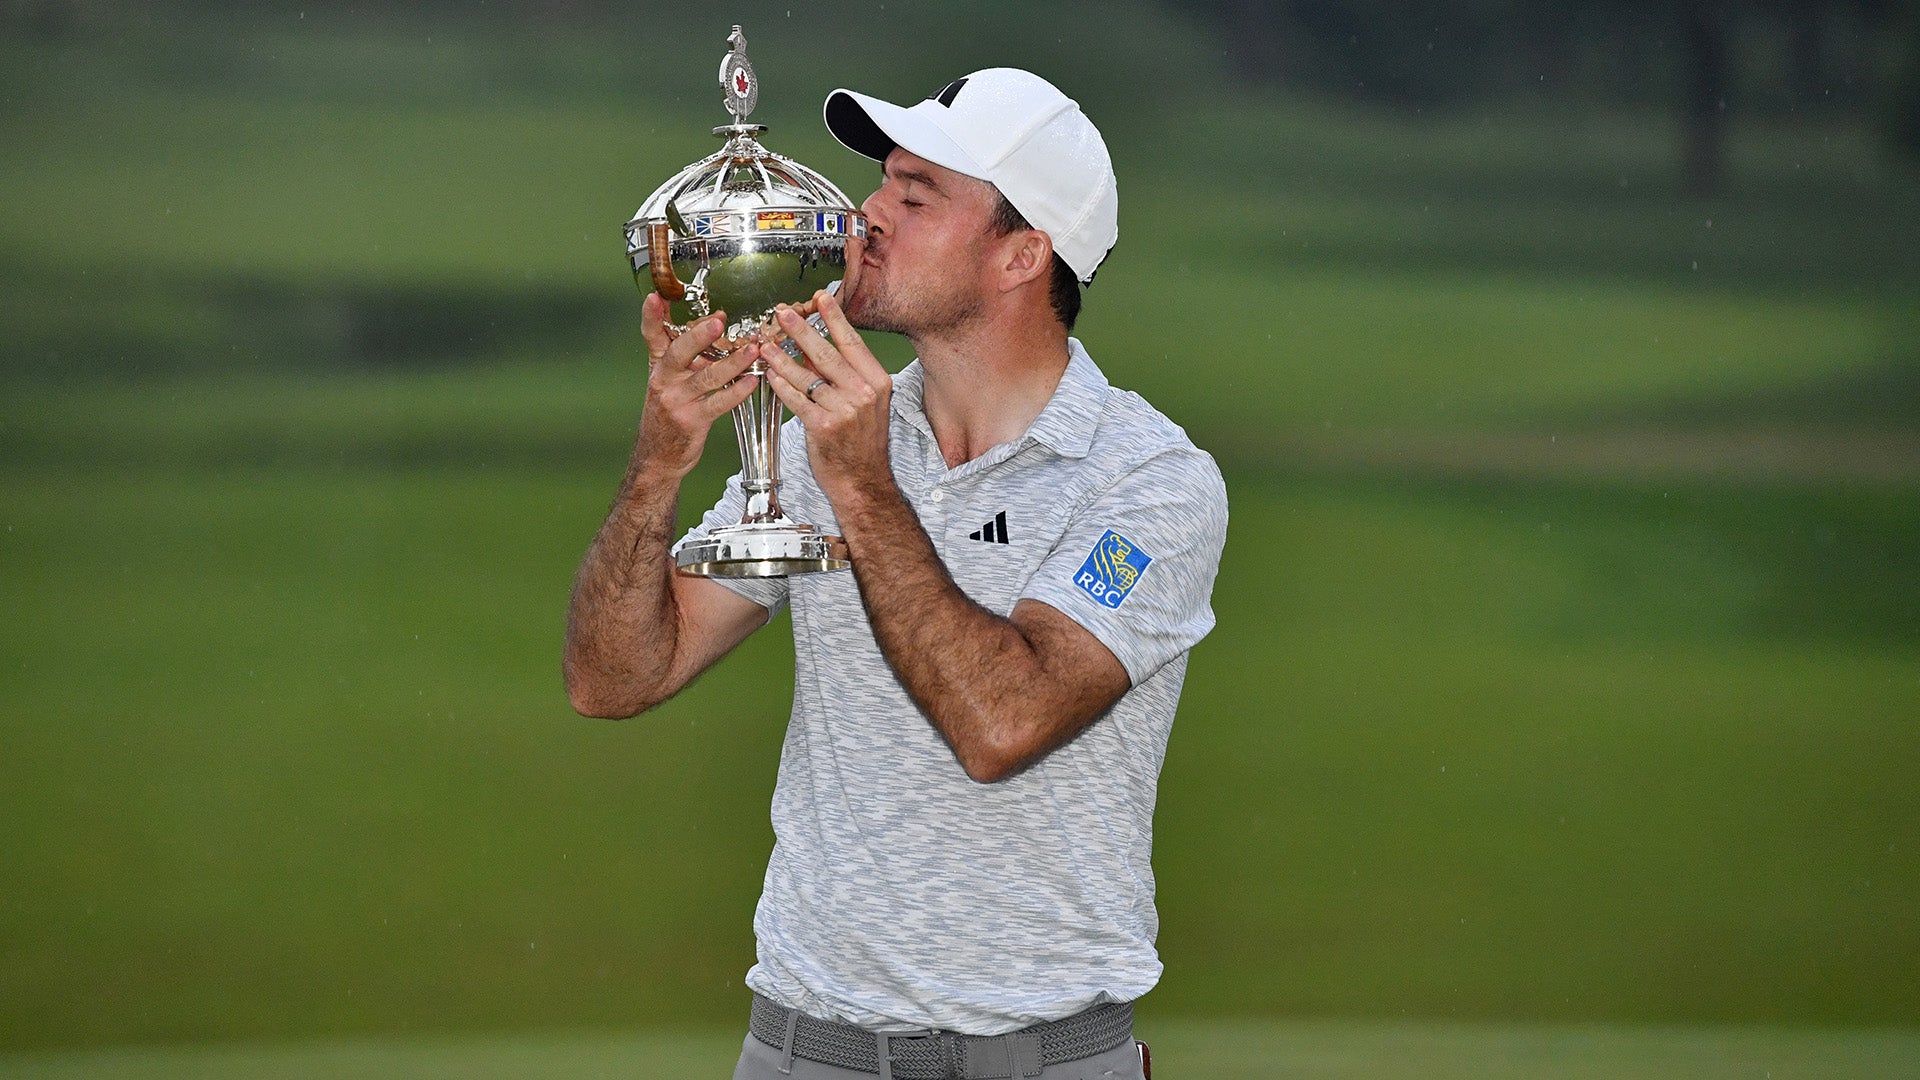 NICK TAYLOR WINS THE RBC Canadian Open